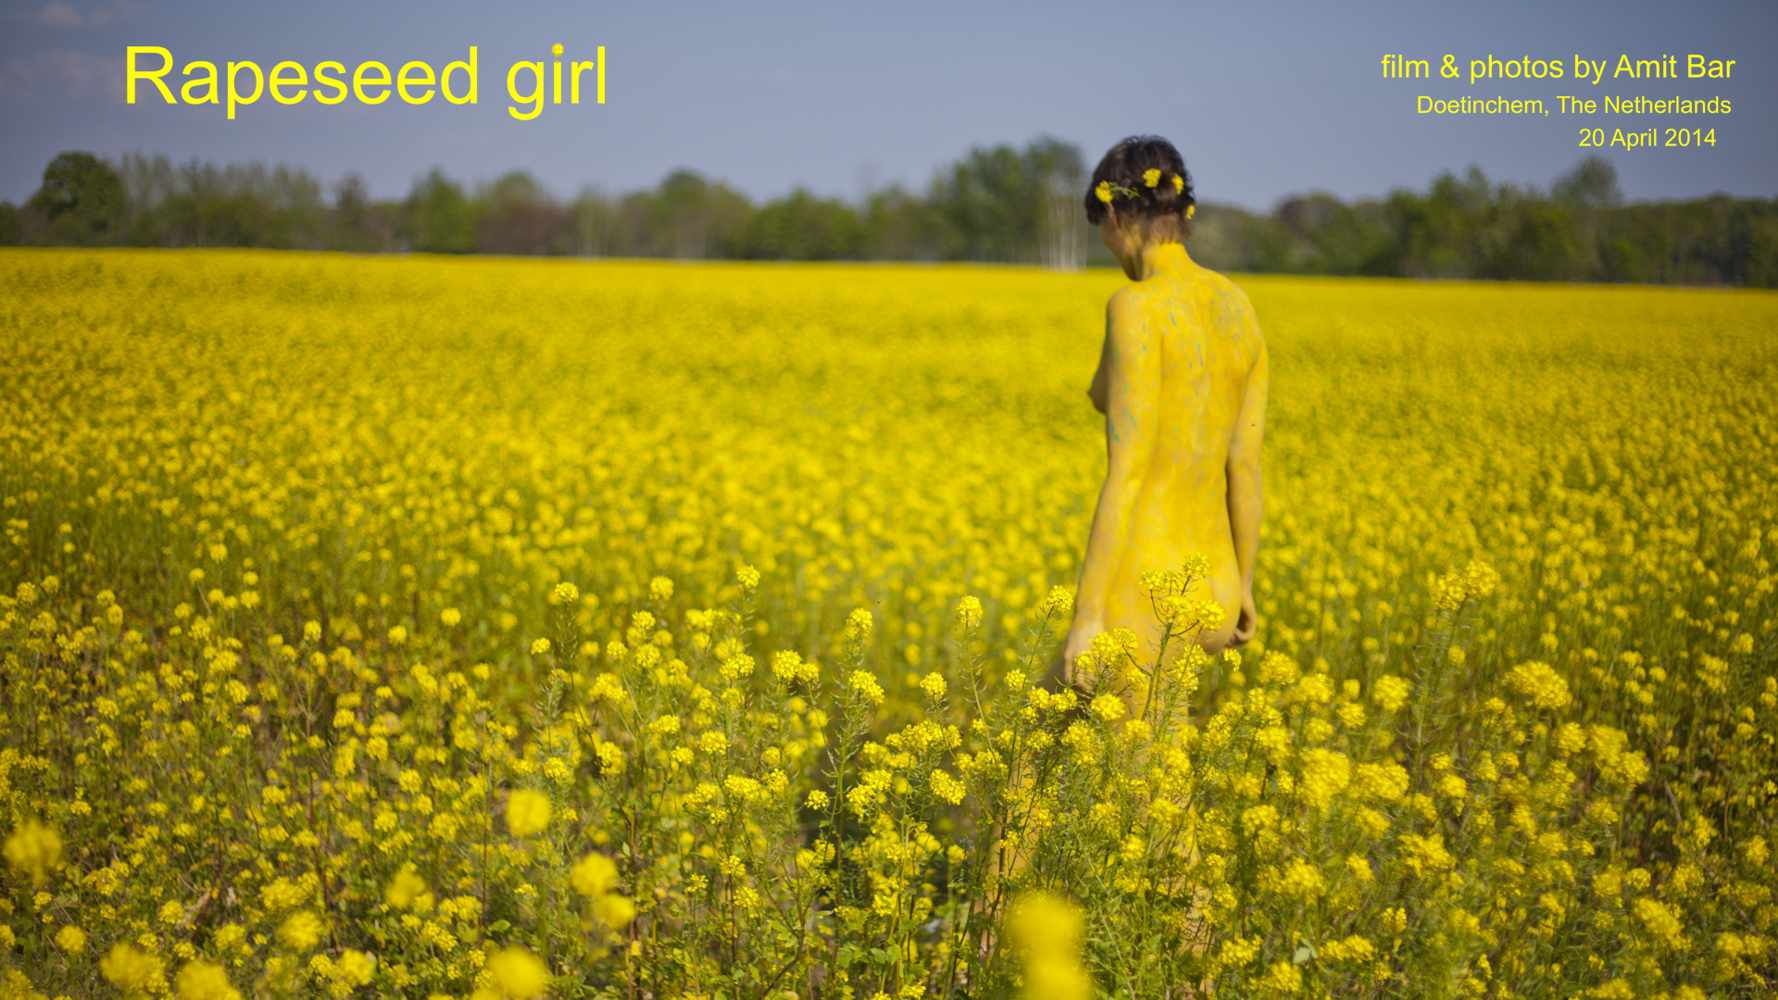 Rapeseed girl video: A rapseed field is beautiful, but is twice so beautiful when a body-painted girl is walking among the flowers.